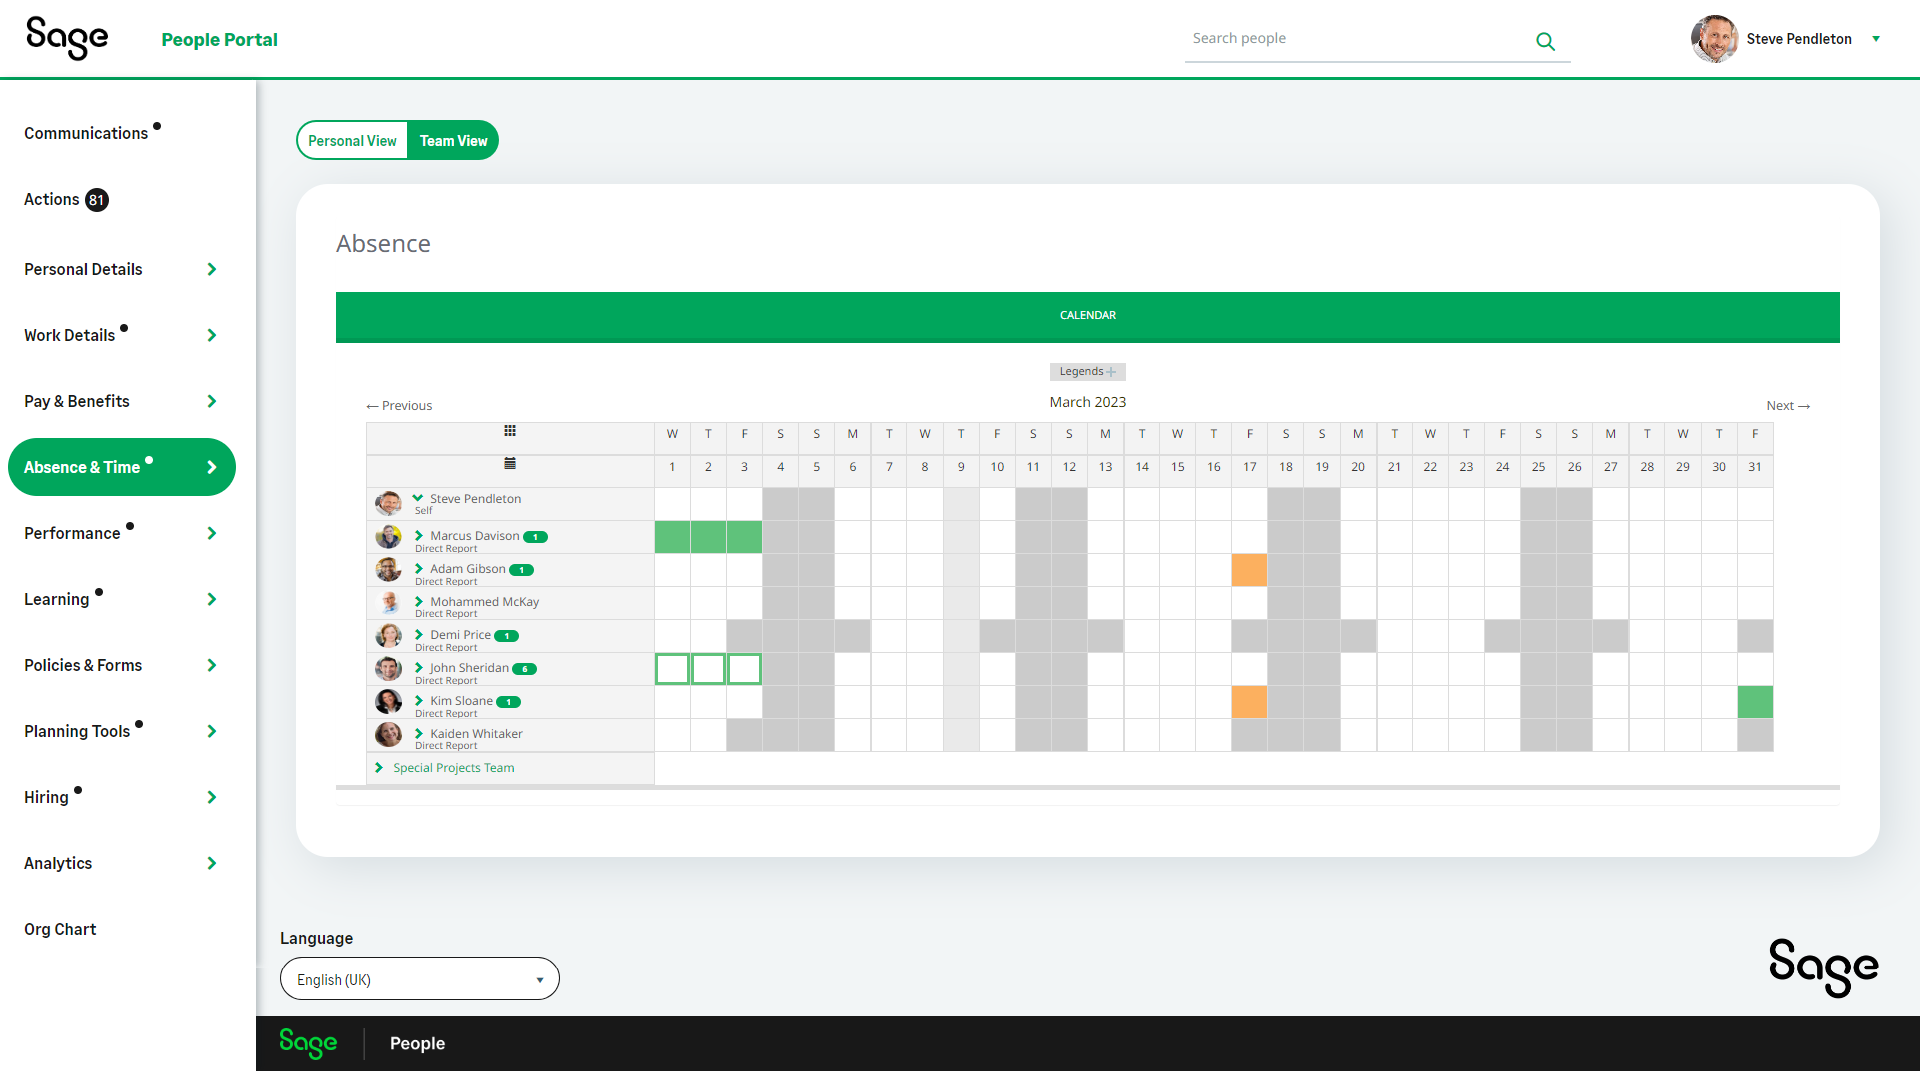 Enable managers to get a complete view of who is in or out of the business at any time across a range of absence types with a team view calendar